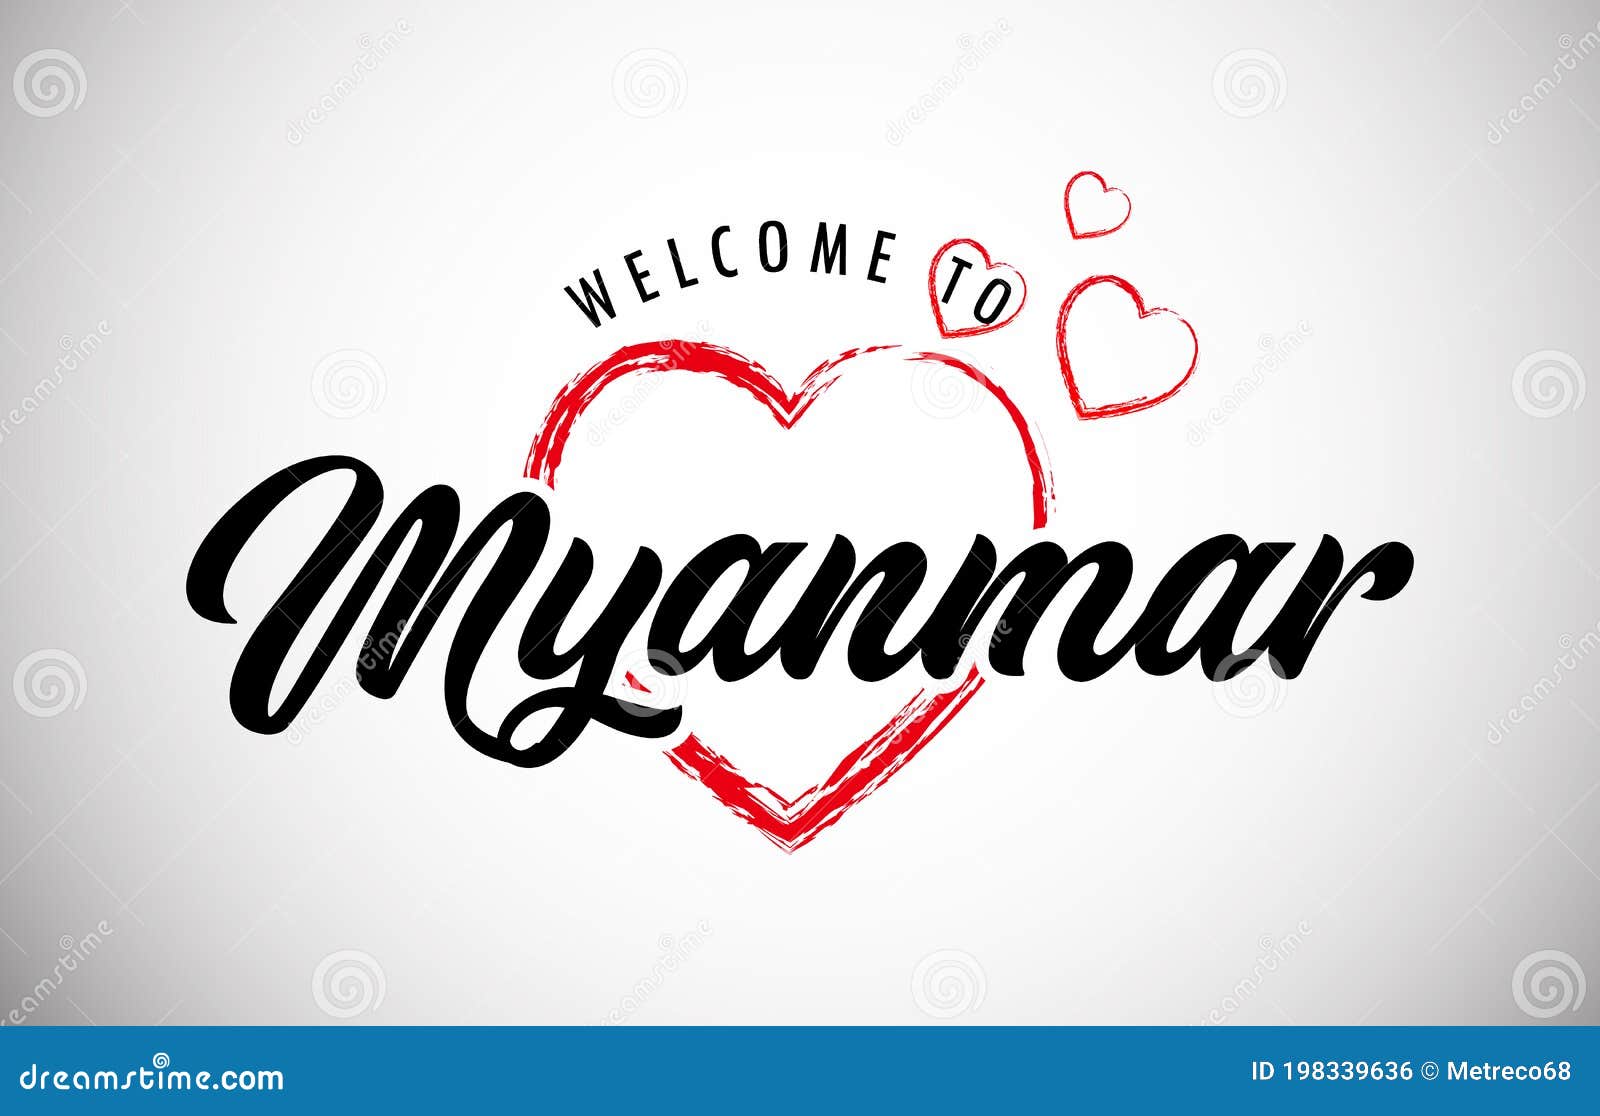 Myanmar Welcome To Message With Beautiful Red Hearts Stock Vector